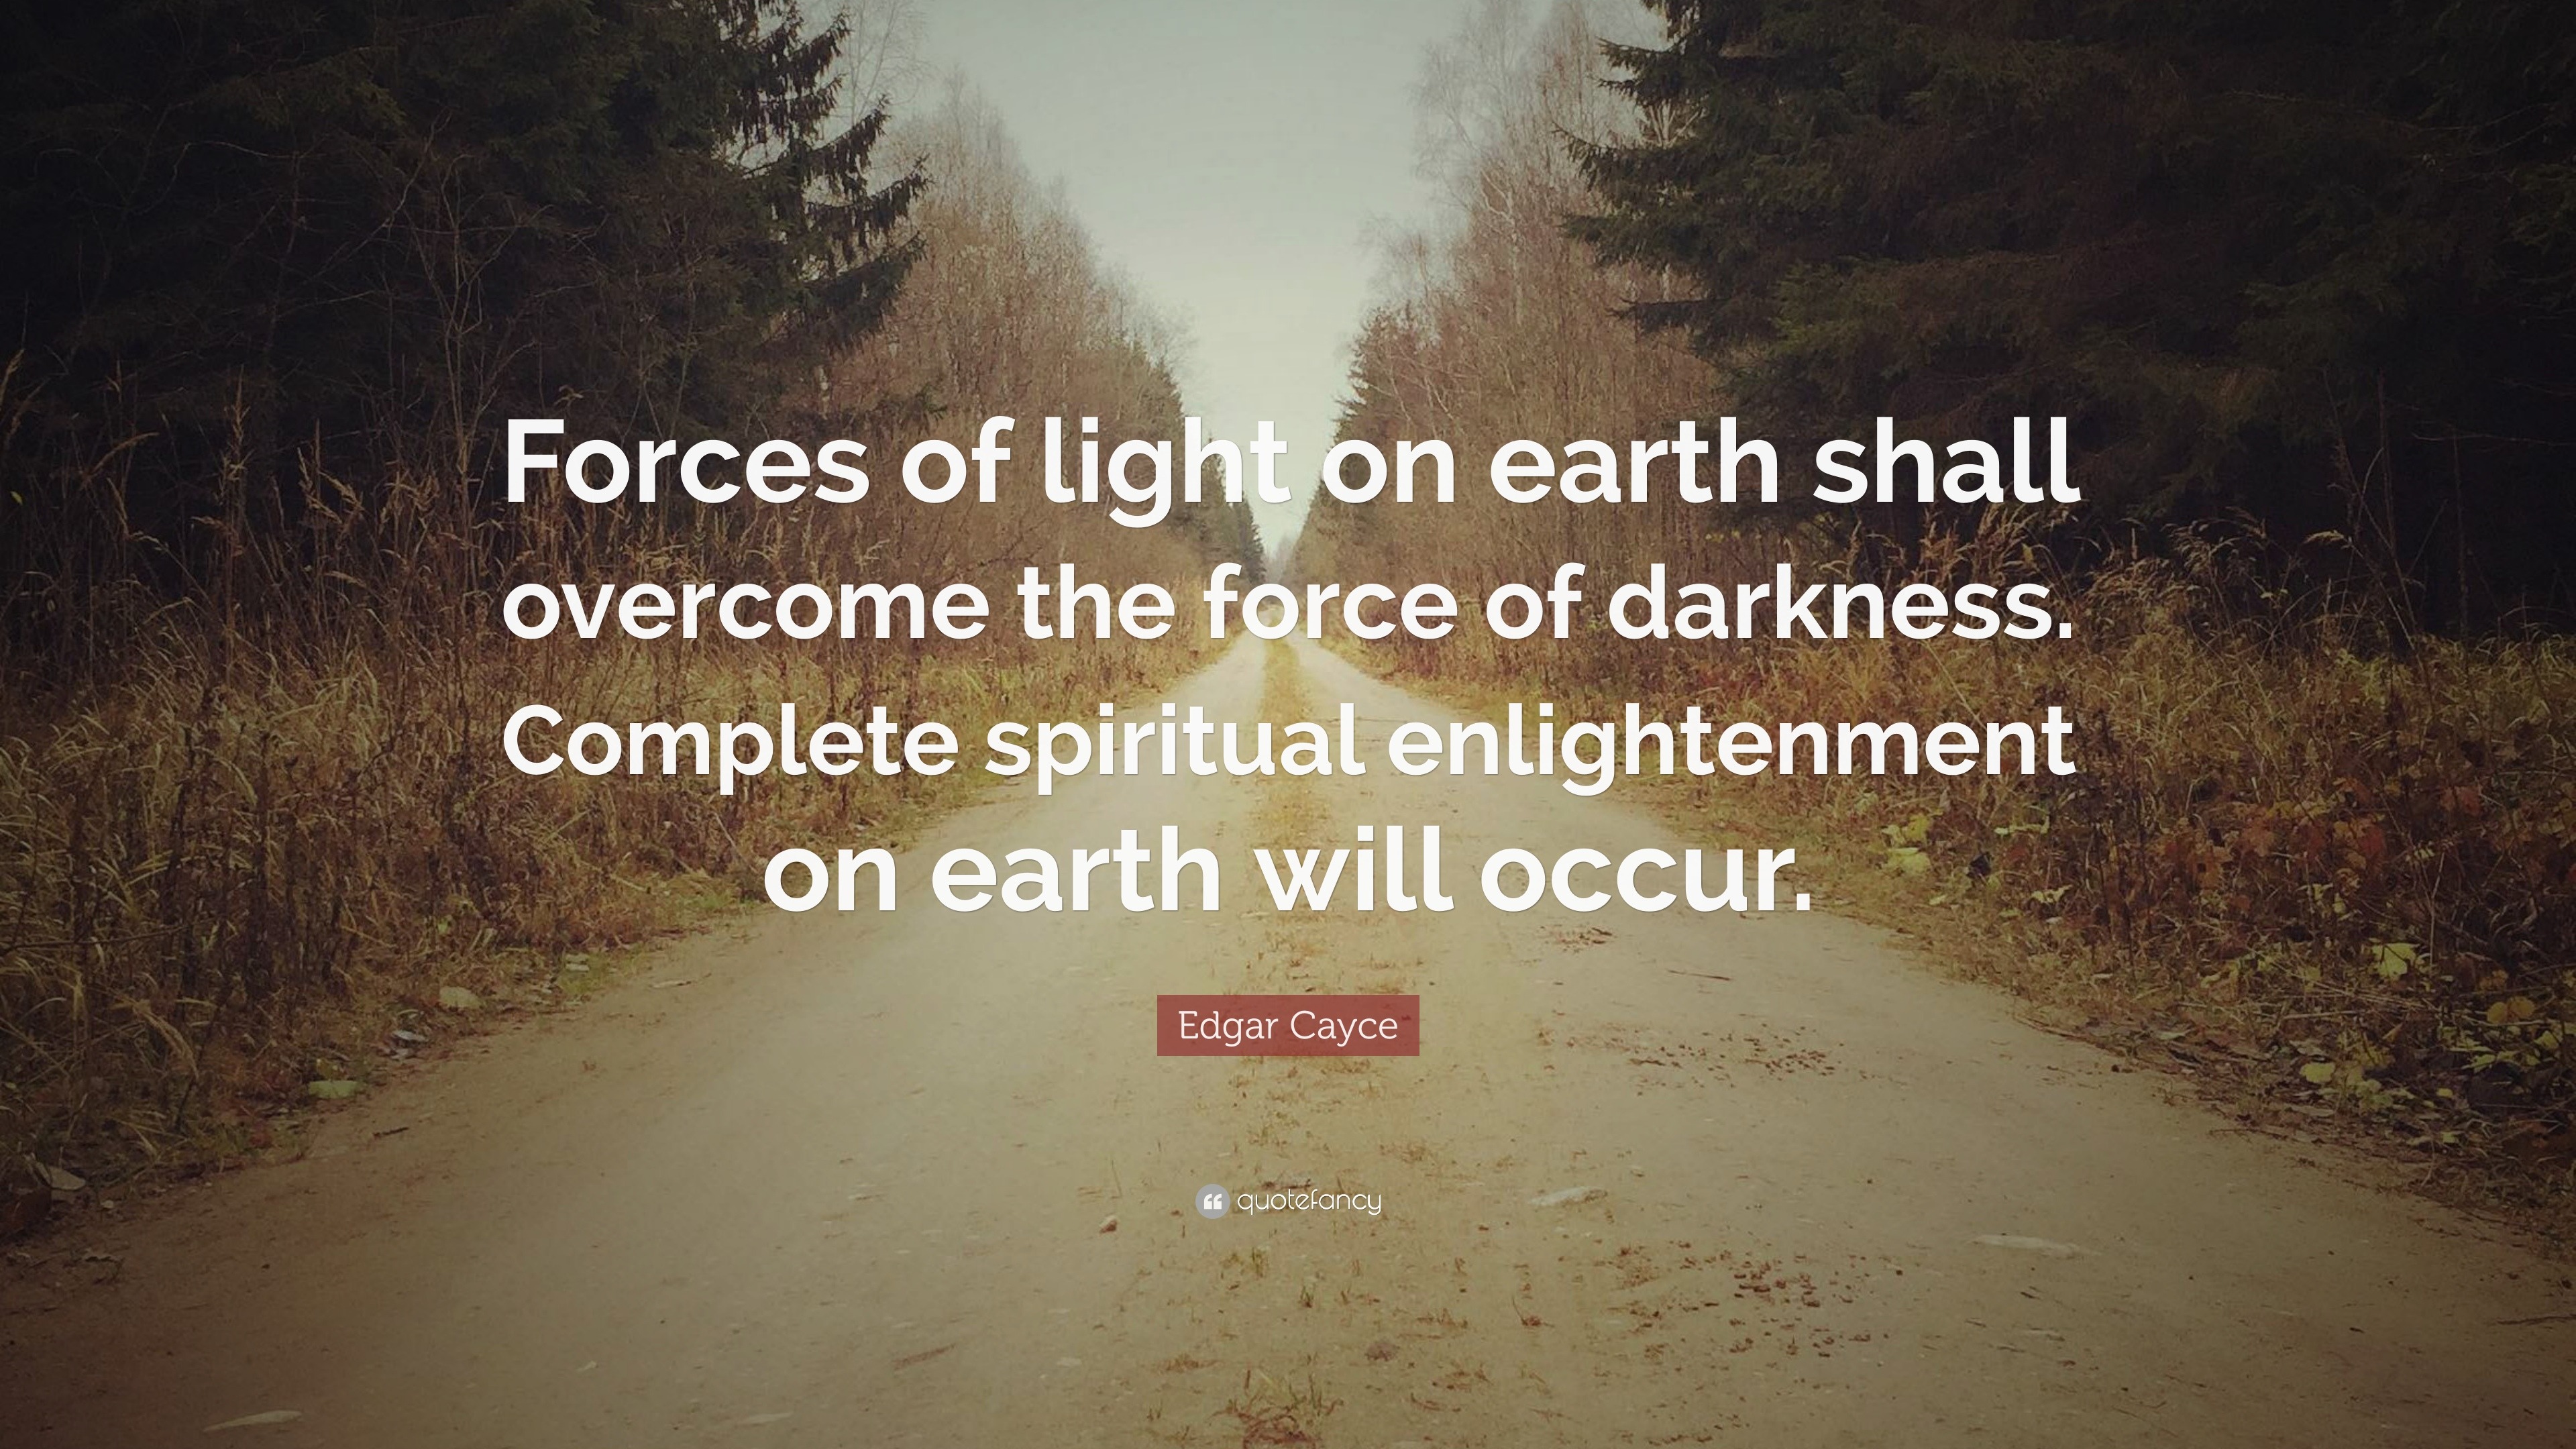 Edgar Cayce Quote: “Forces of light on earth shall overcome the force